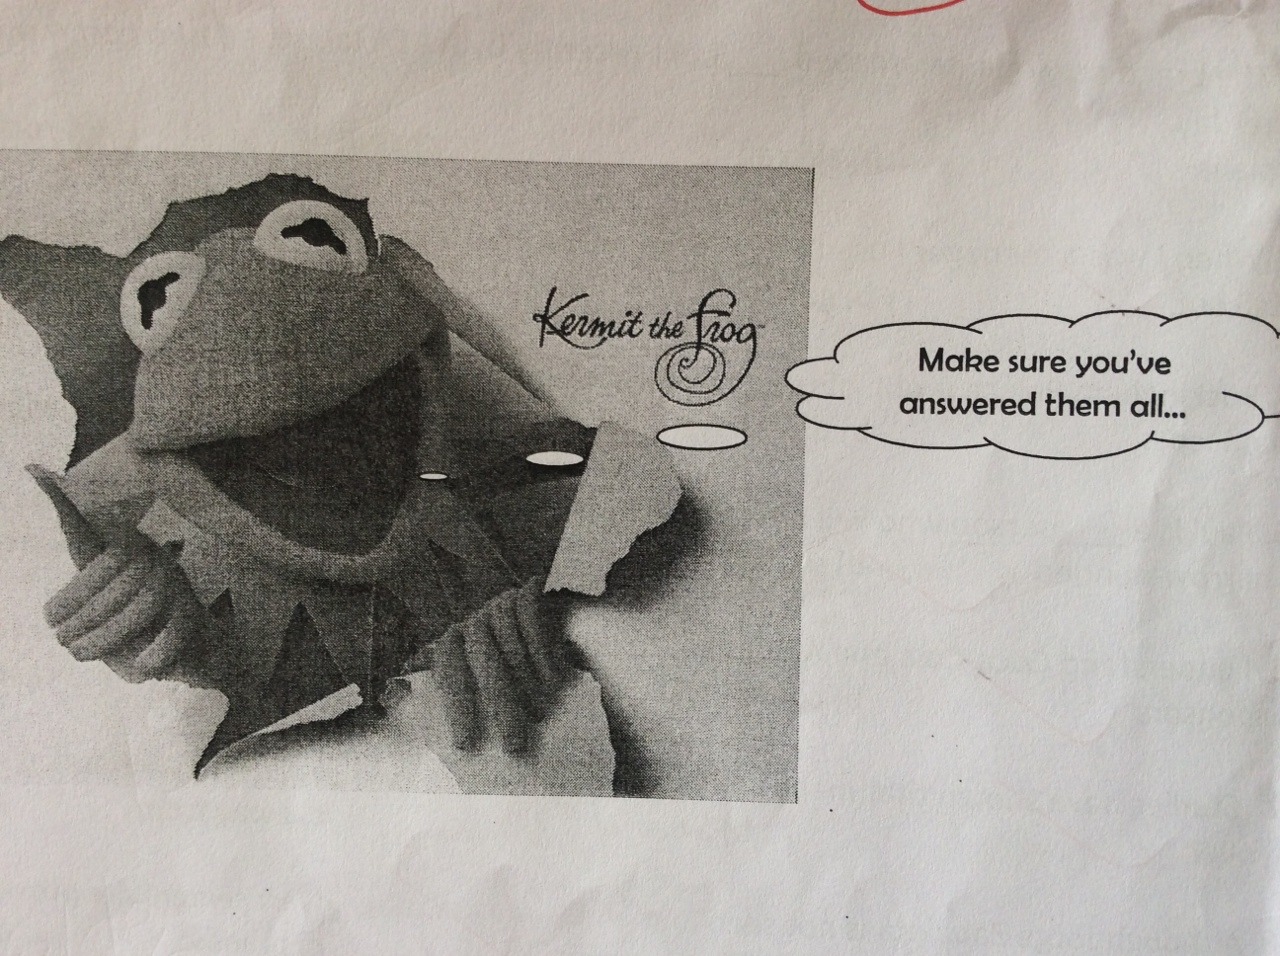 no-son:  My teacher likes to put pictures of Kermit the frog with threatening captions